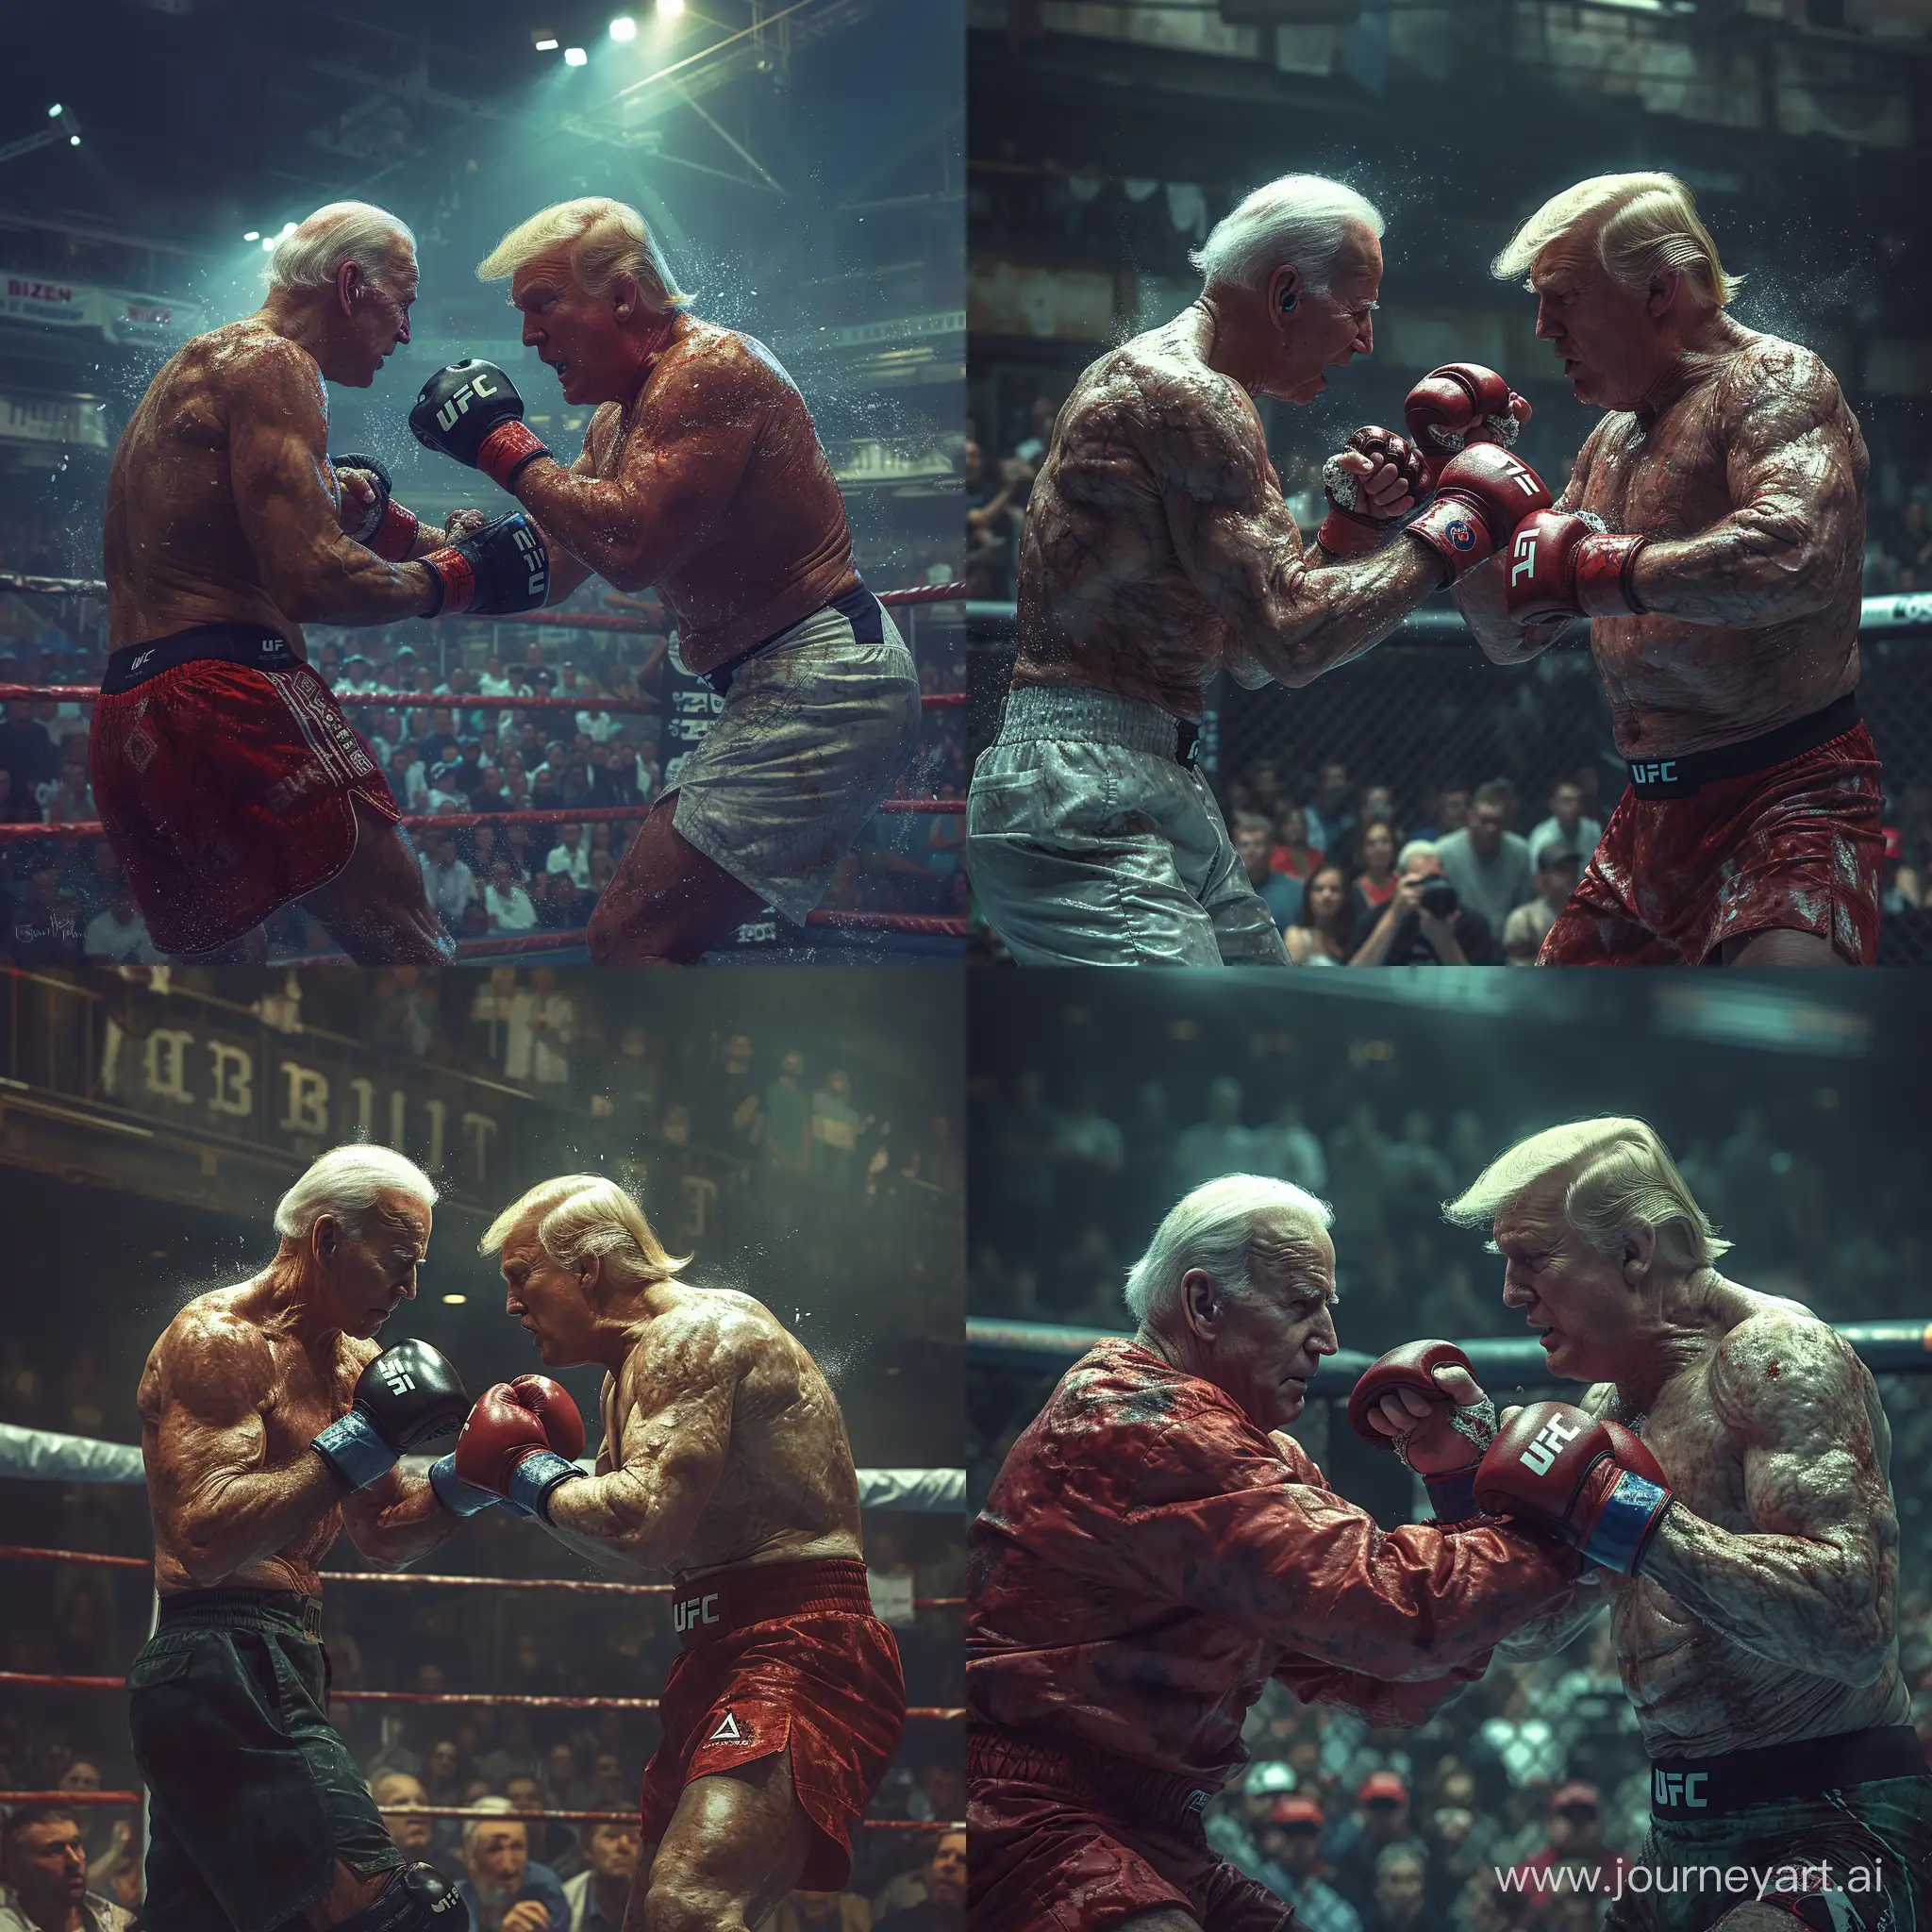 Joe-Biden-and-Donald-Trump-MMA-Match-with-Detailed-Realism